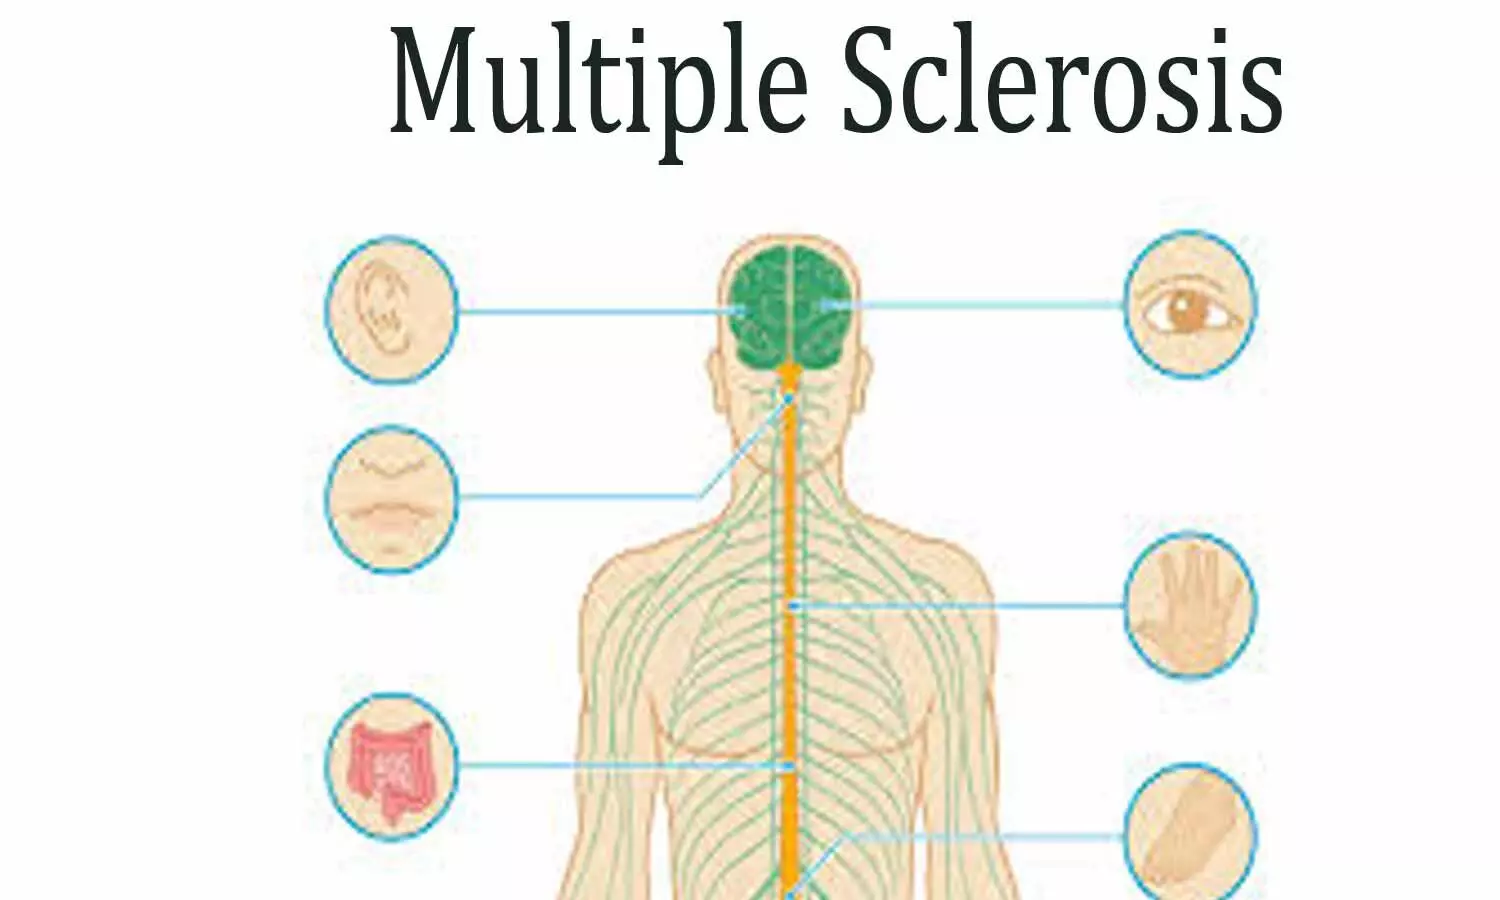 Teriflunomide may temper lesion growth in children with multiple sclerosis: Lancet